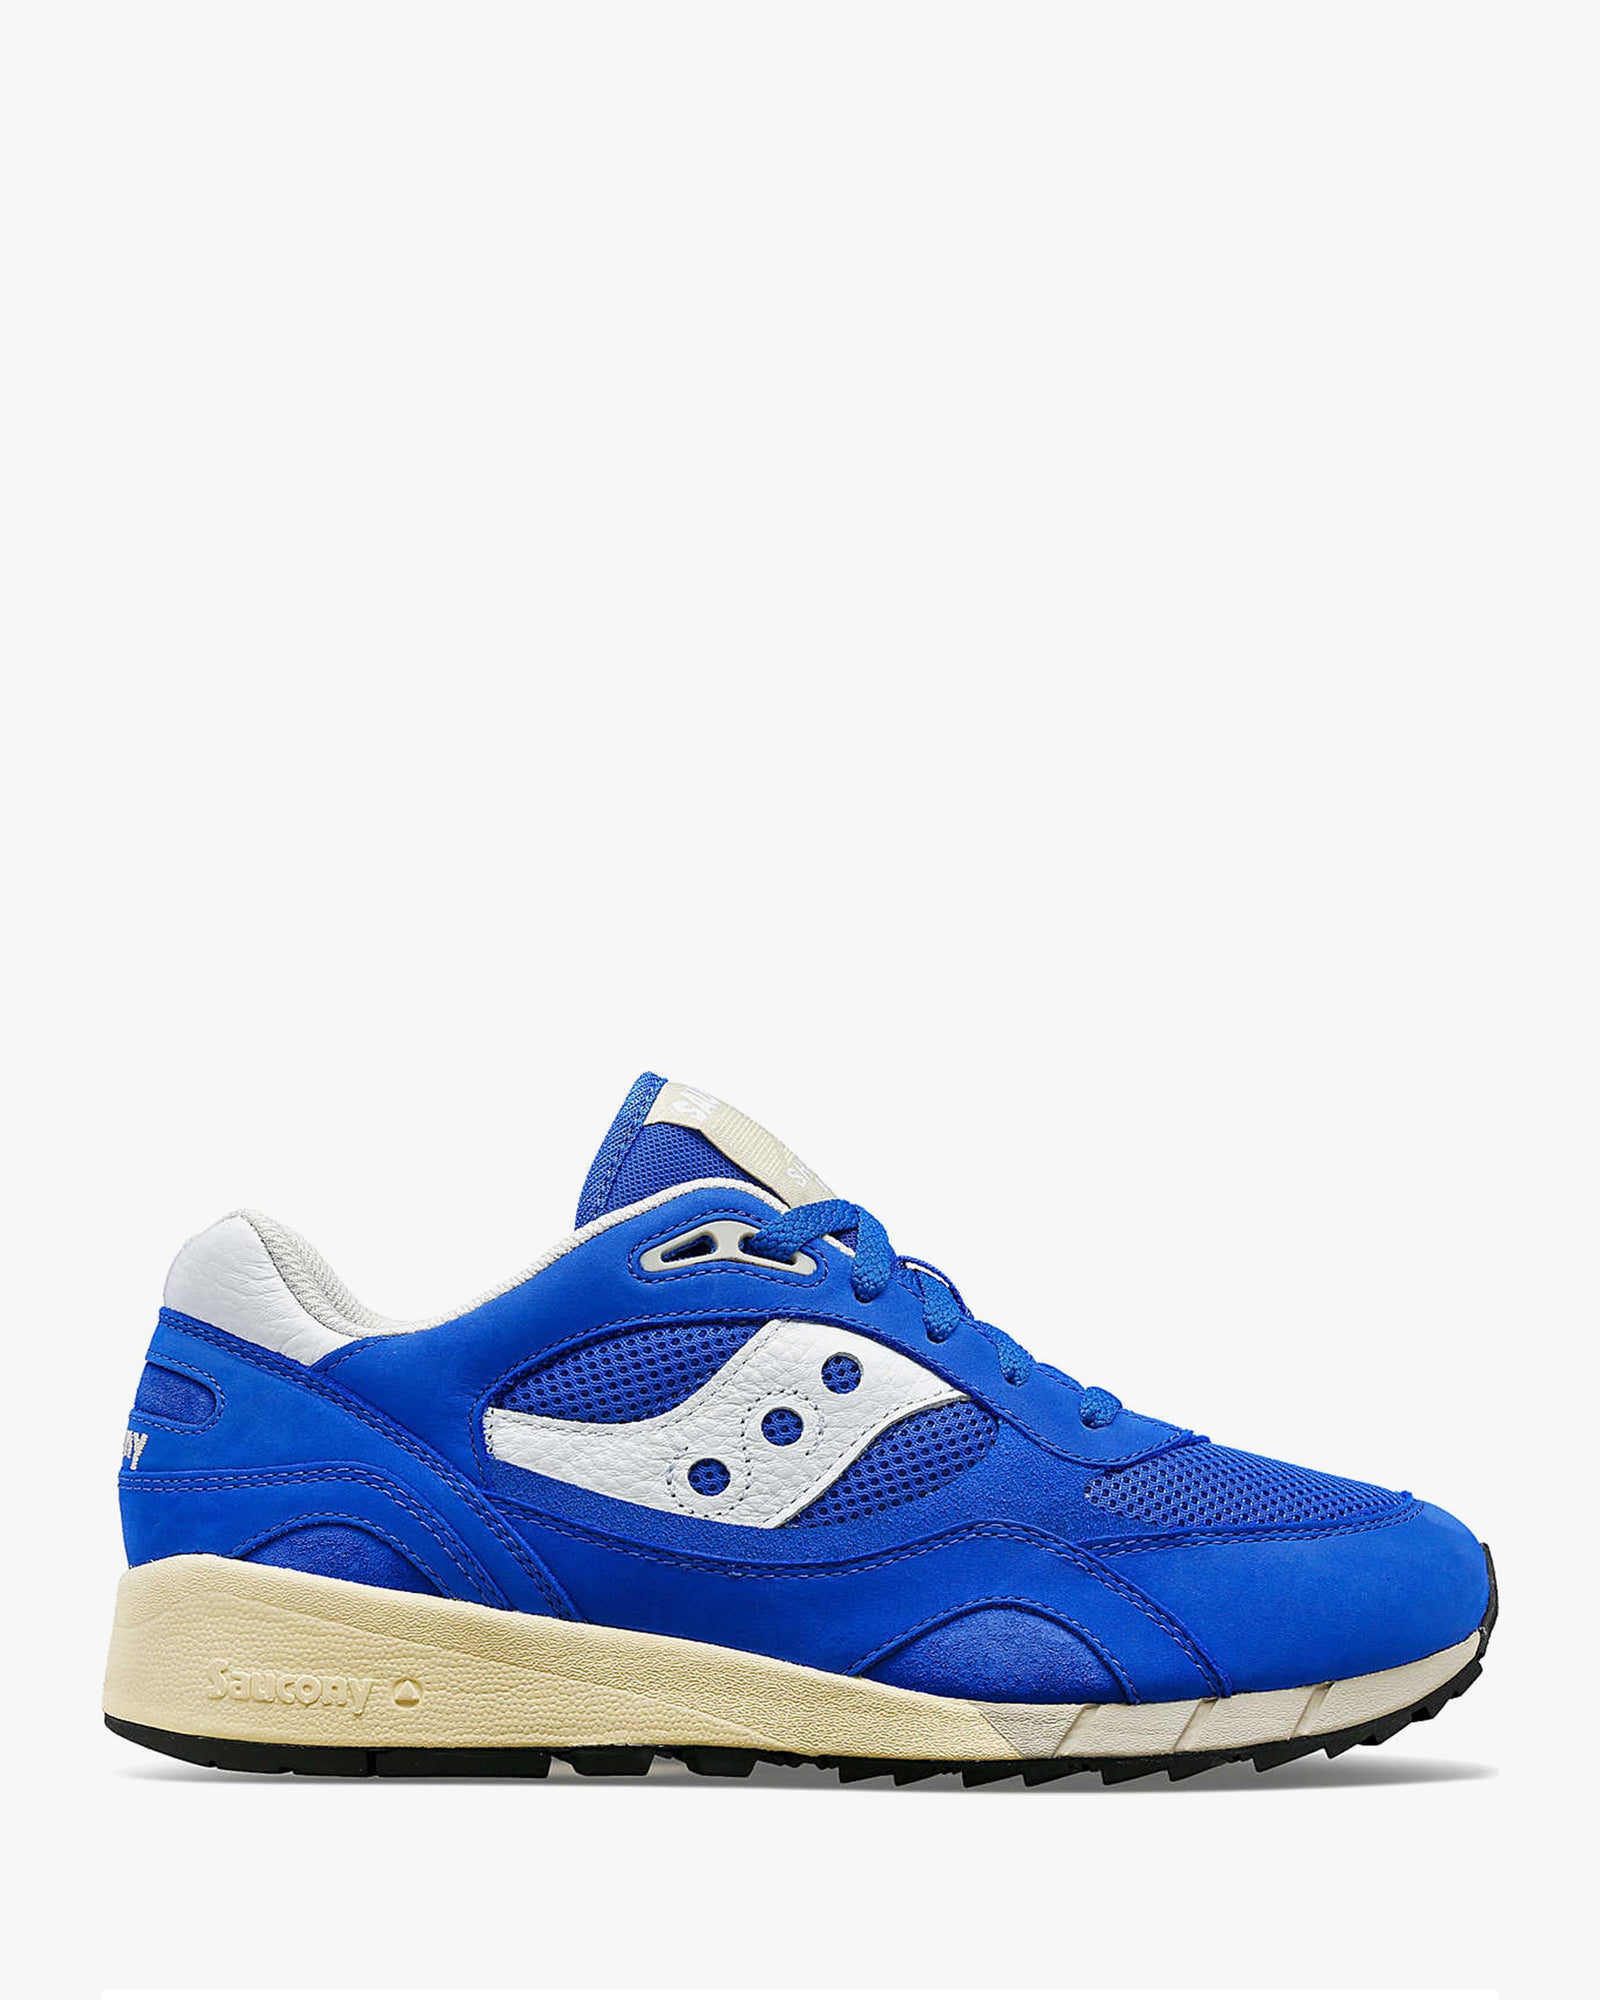 Saucony Shadow 6000 Sneakers in Blue and White 